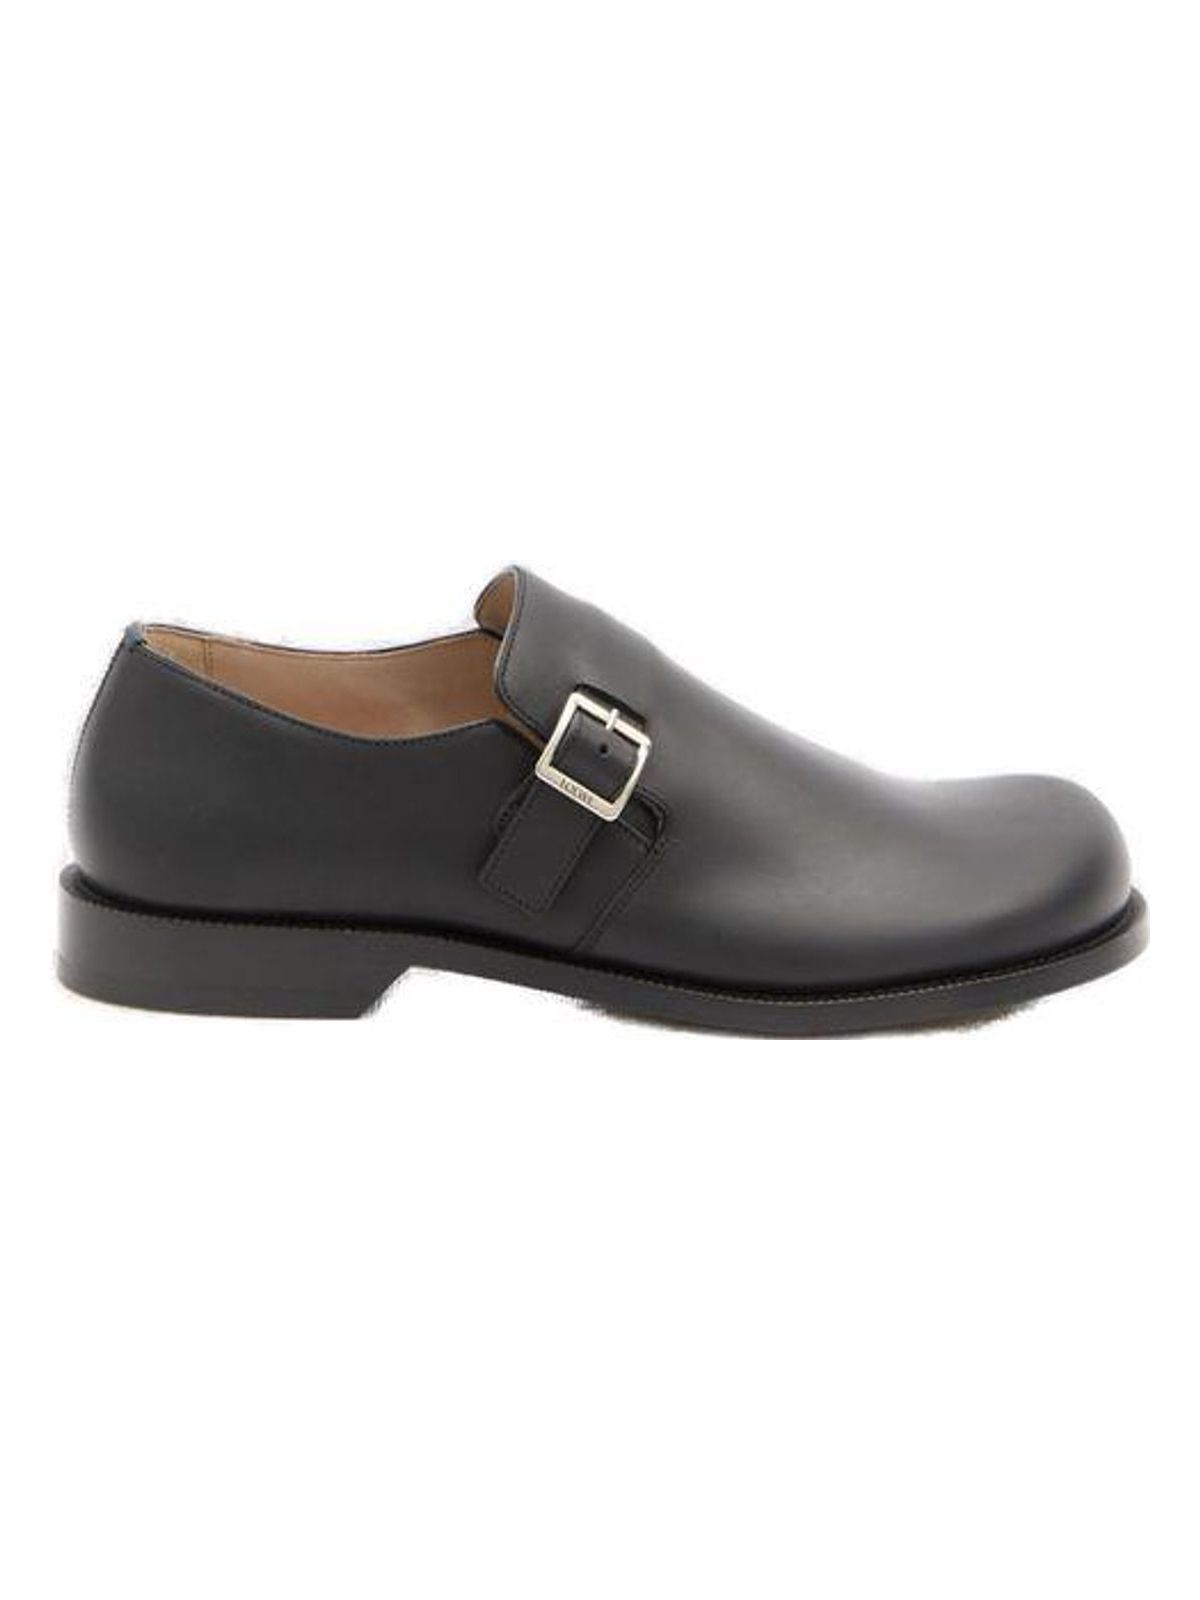 1100 LOEWE DERBY SHOES WITH CAMPO BUCKLE